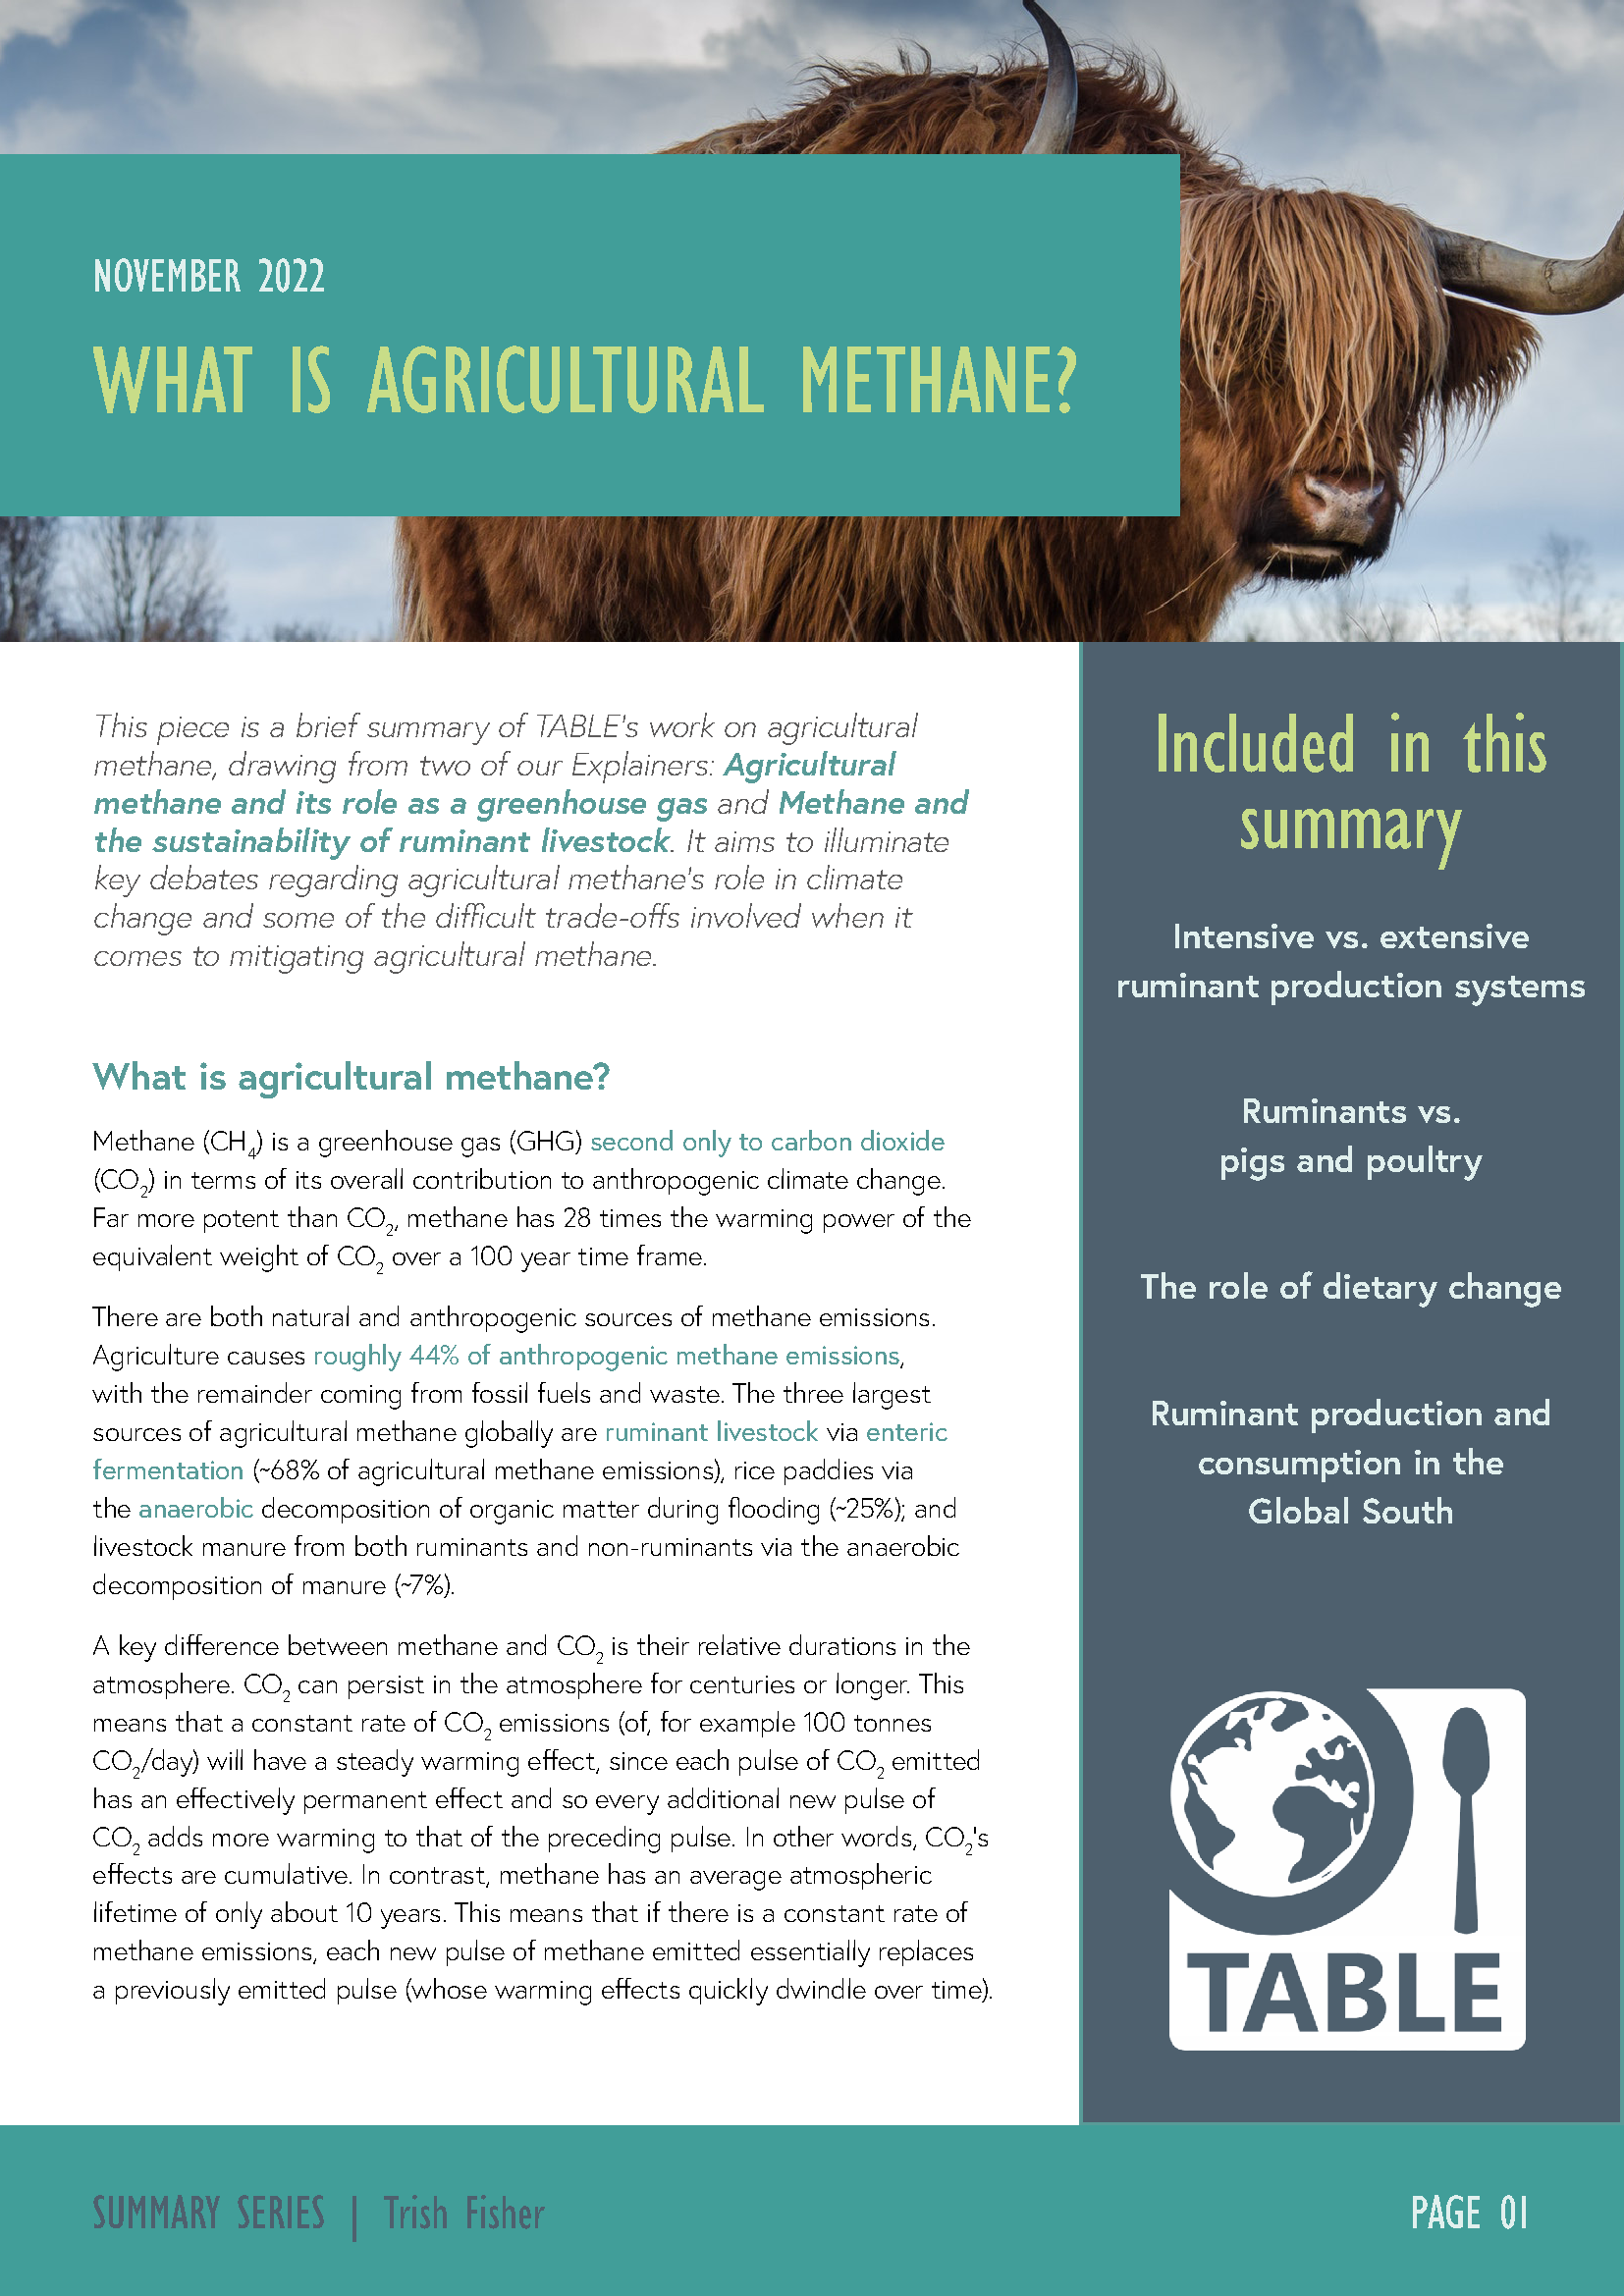 Page 1 of the agricultural methane summary